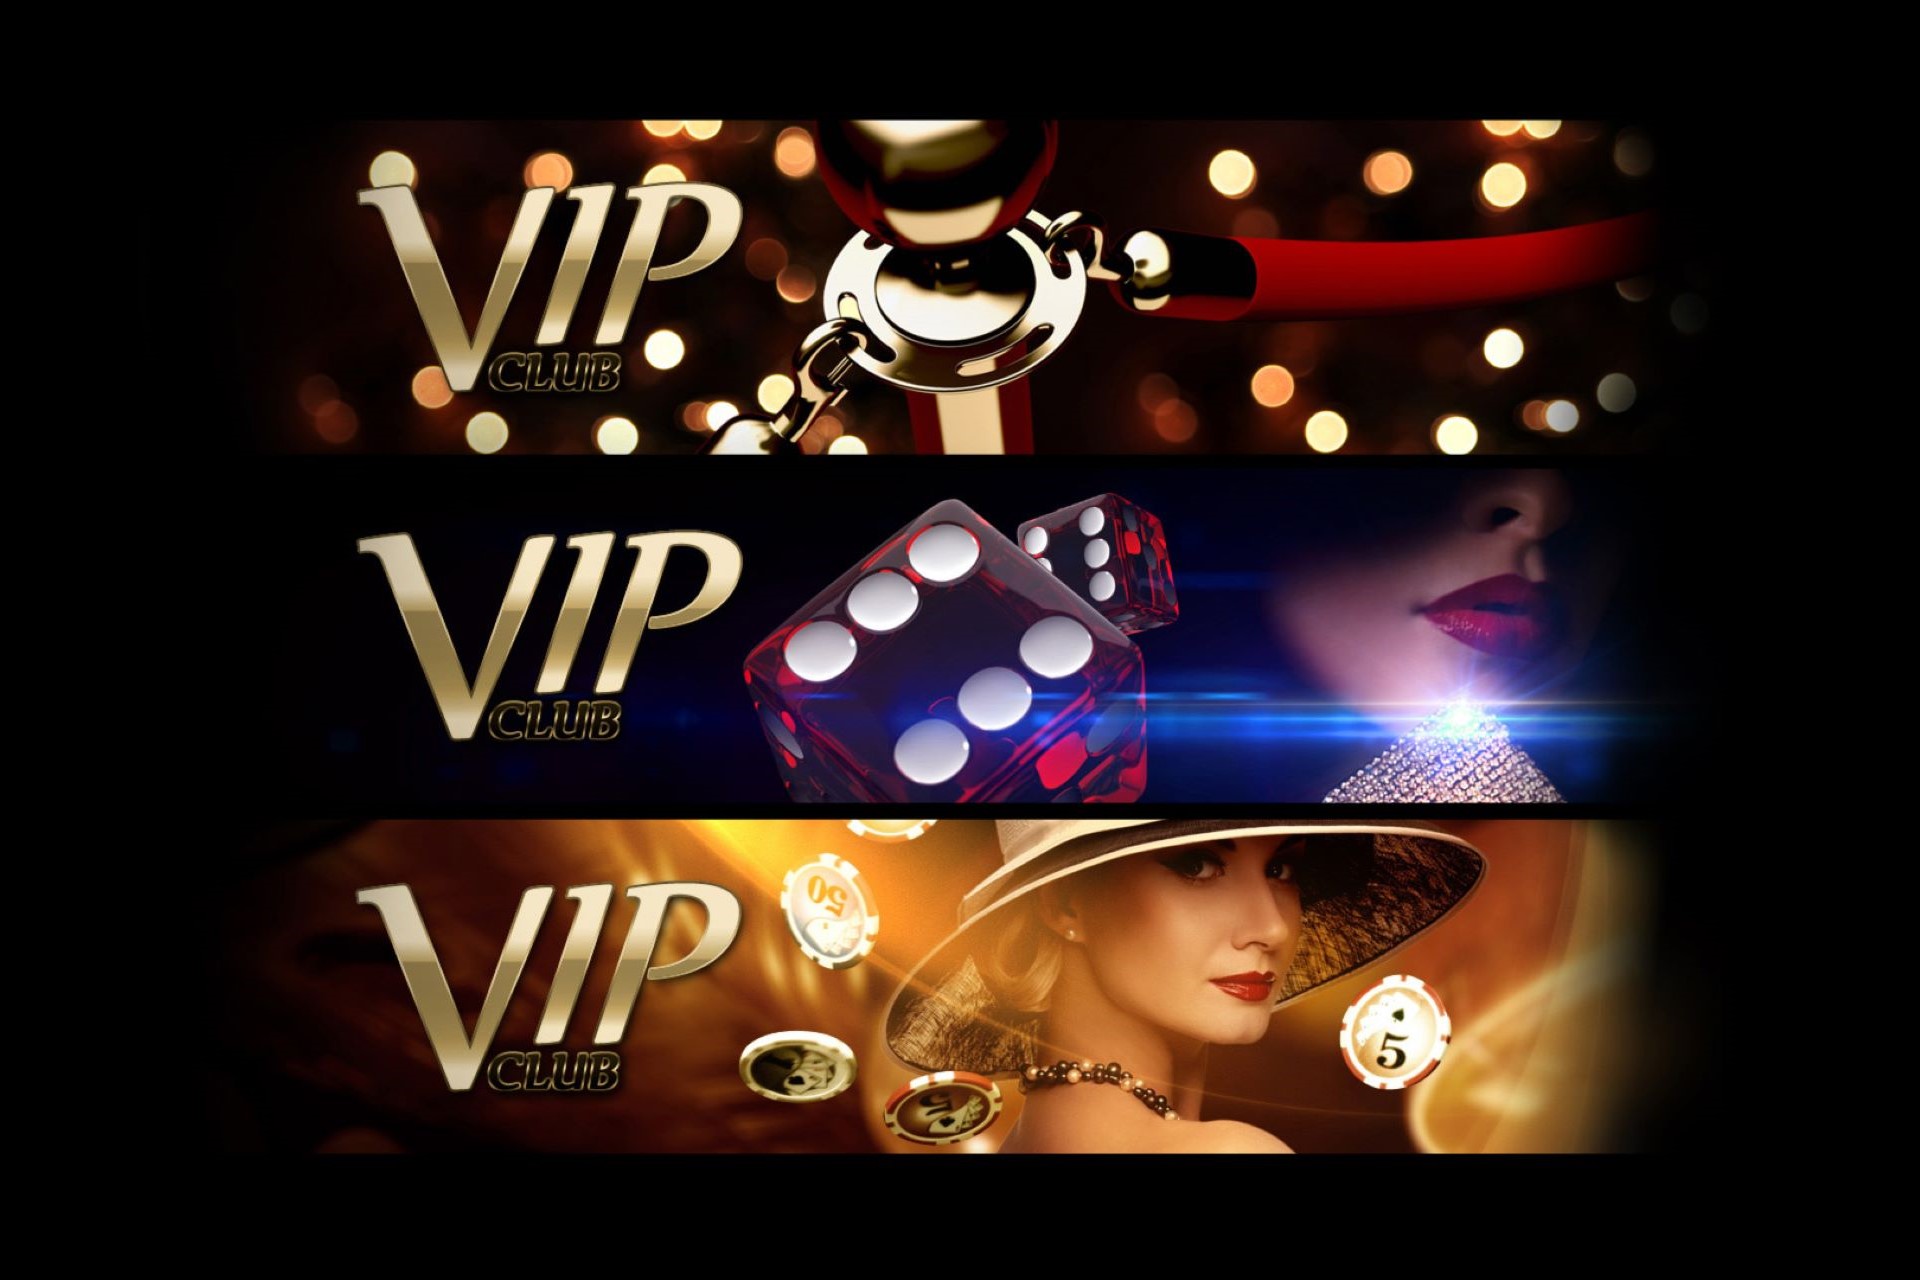 How to join VIP programs for exclusive slot bonuses in Australian casinos